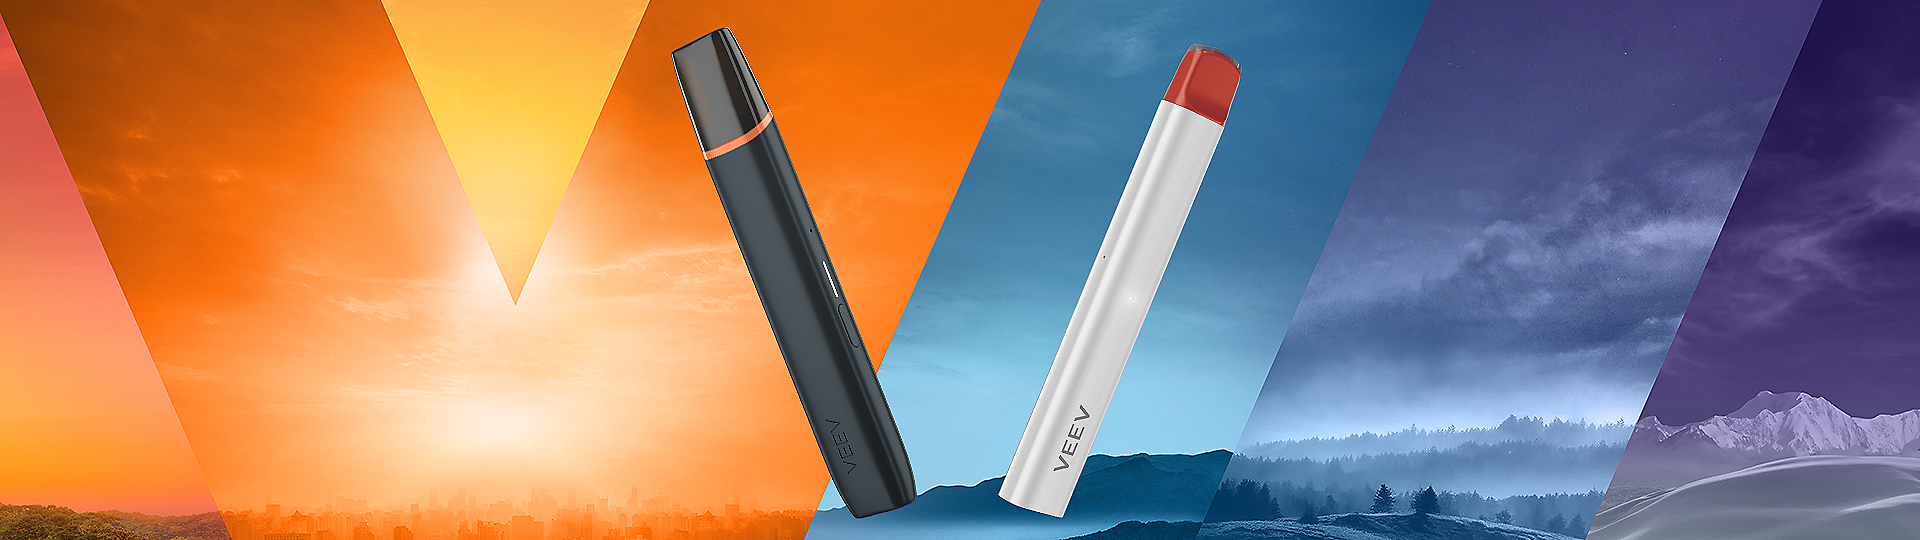 VEEV ONE and VEEV NOW vaping devices on the promotional banner